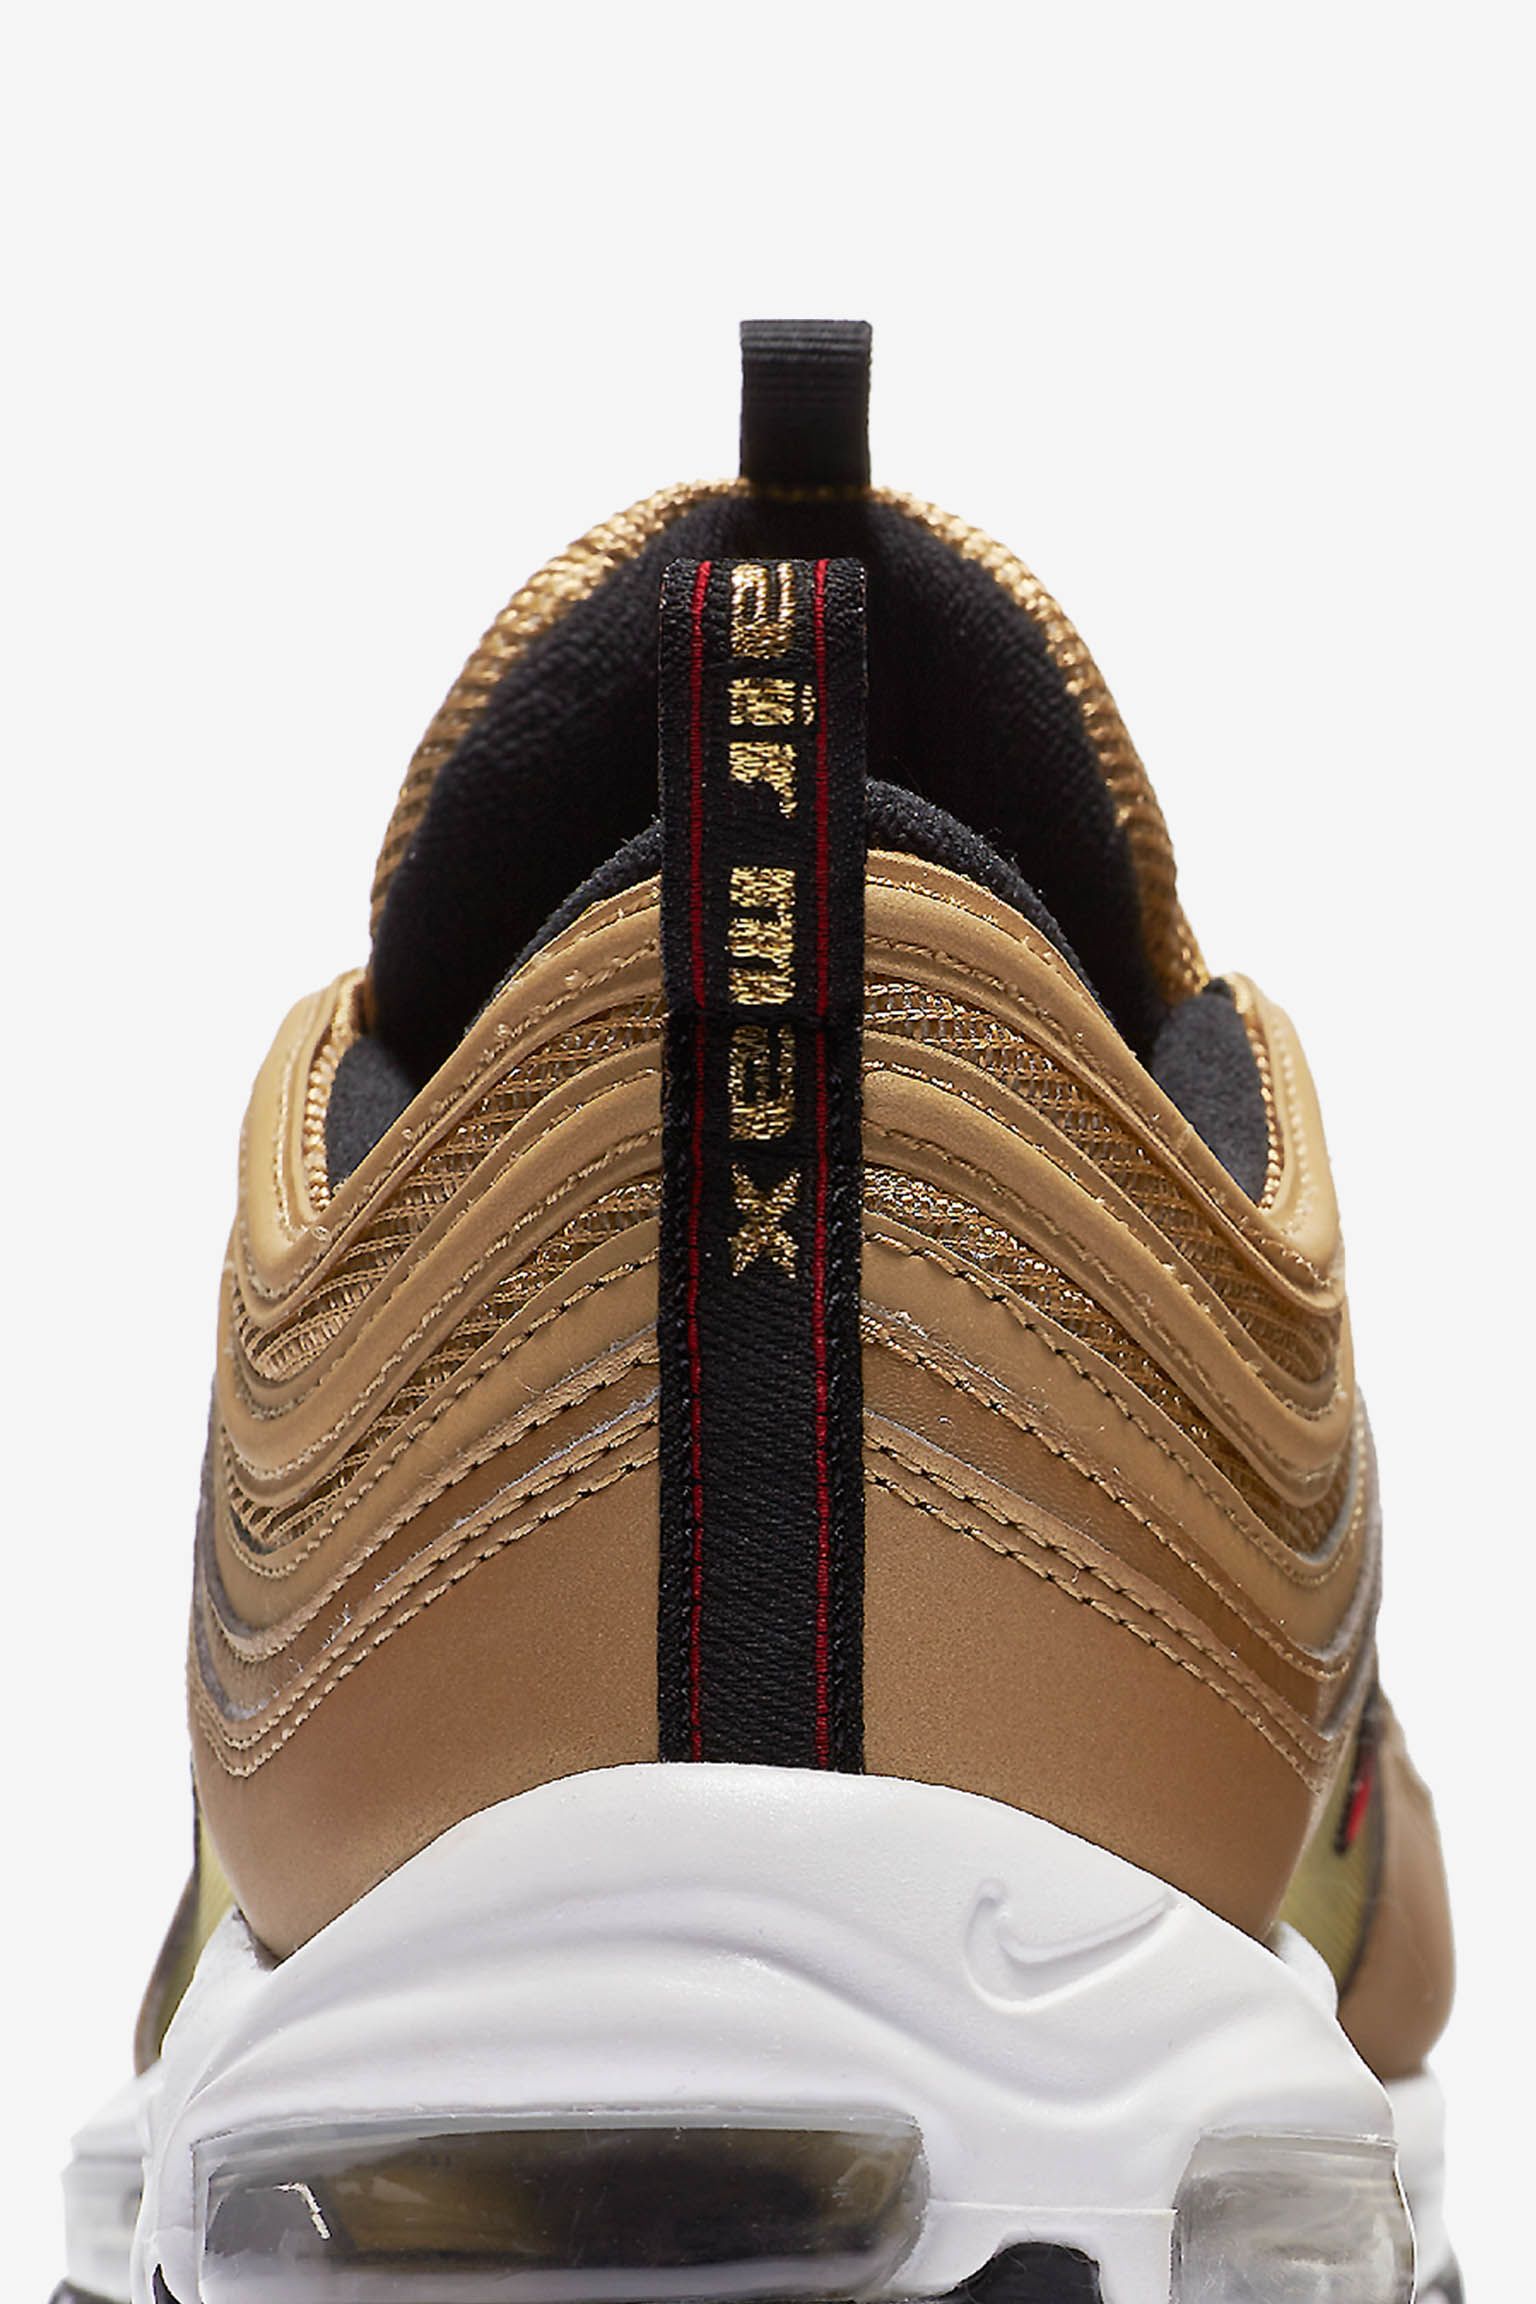 Nike Air Max 97 OG QS 'Metallic Gold' Release Date. Nike SNKRS دييغو مارادونا